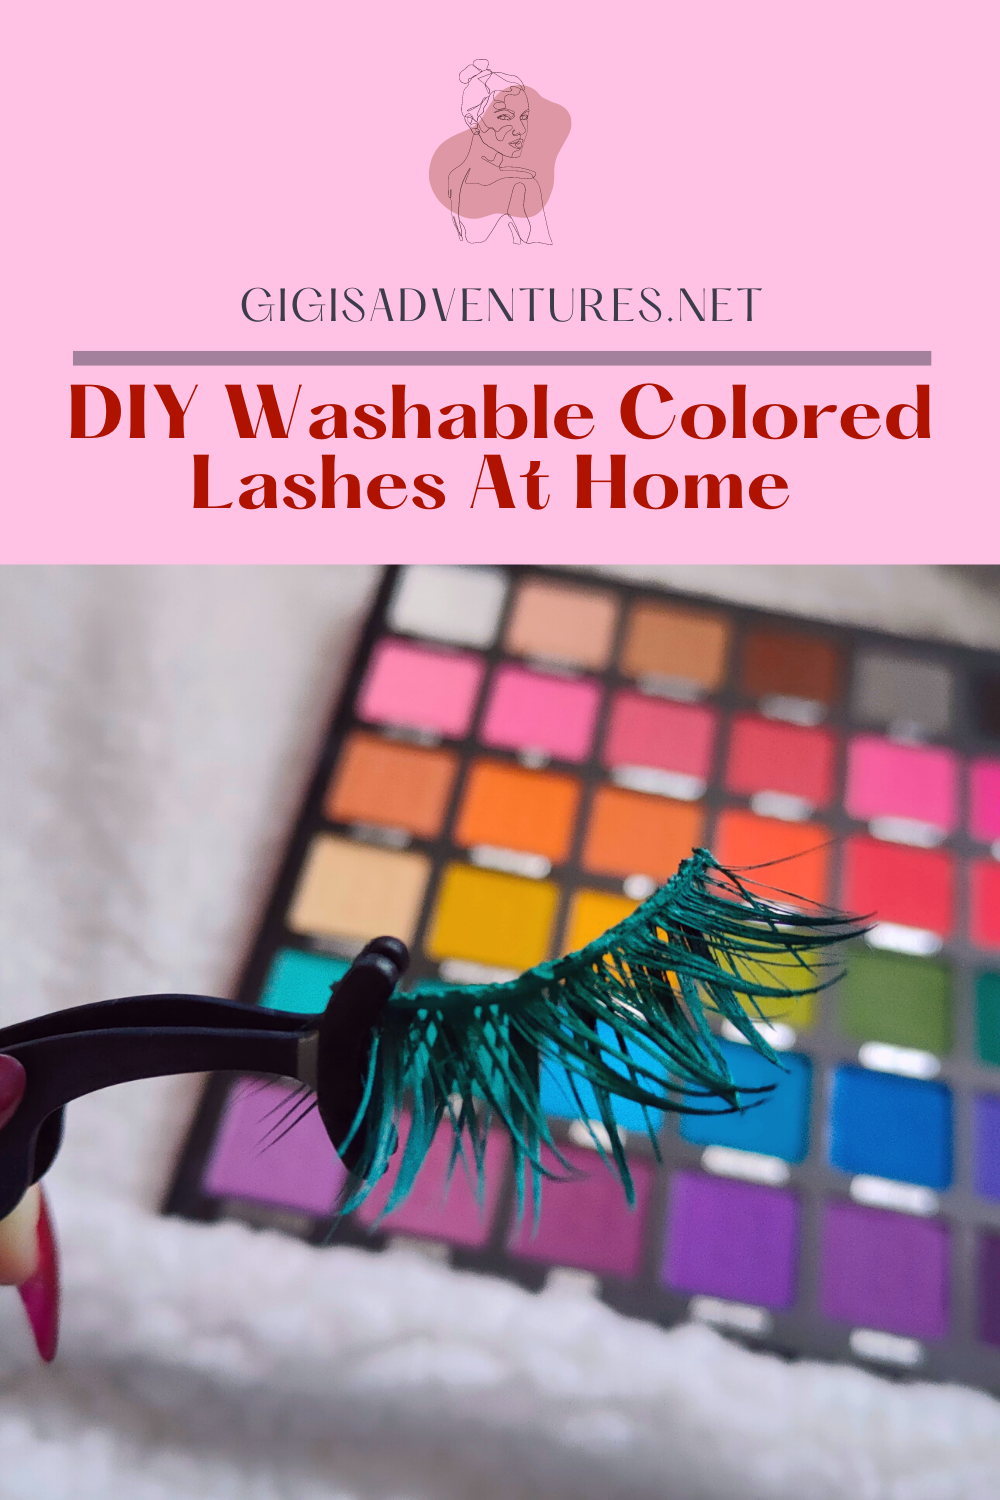 How To Make Washable Colored Lashes At Home | DIY Colored False Lashes